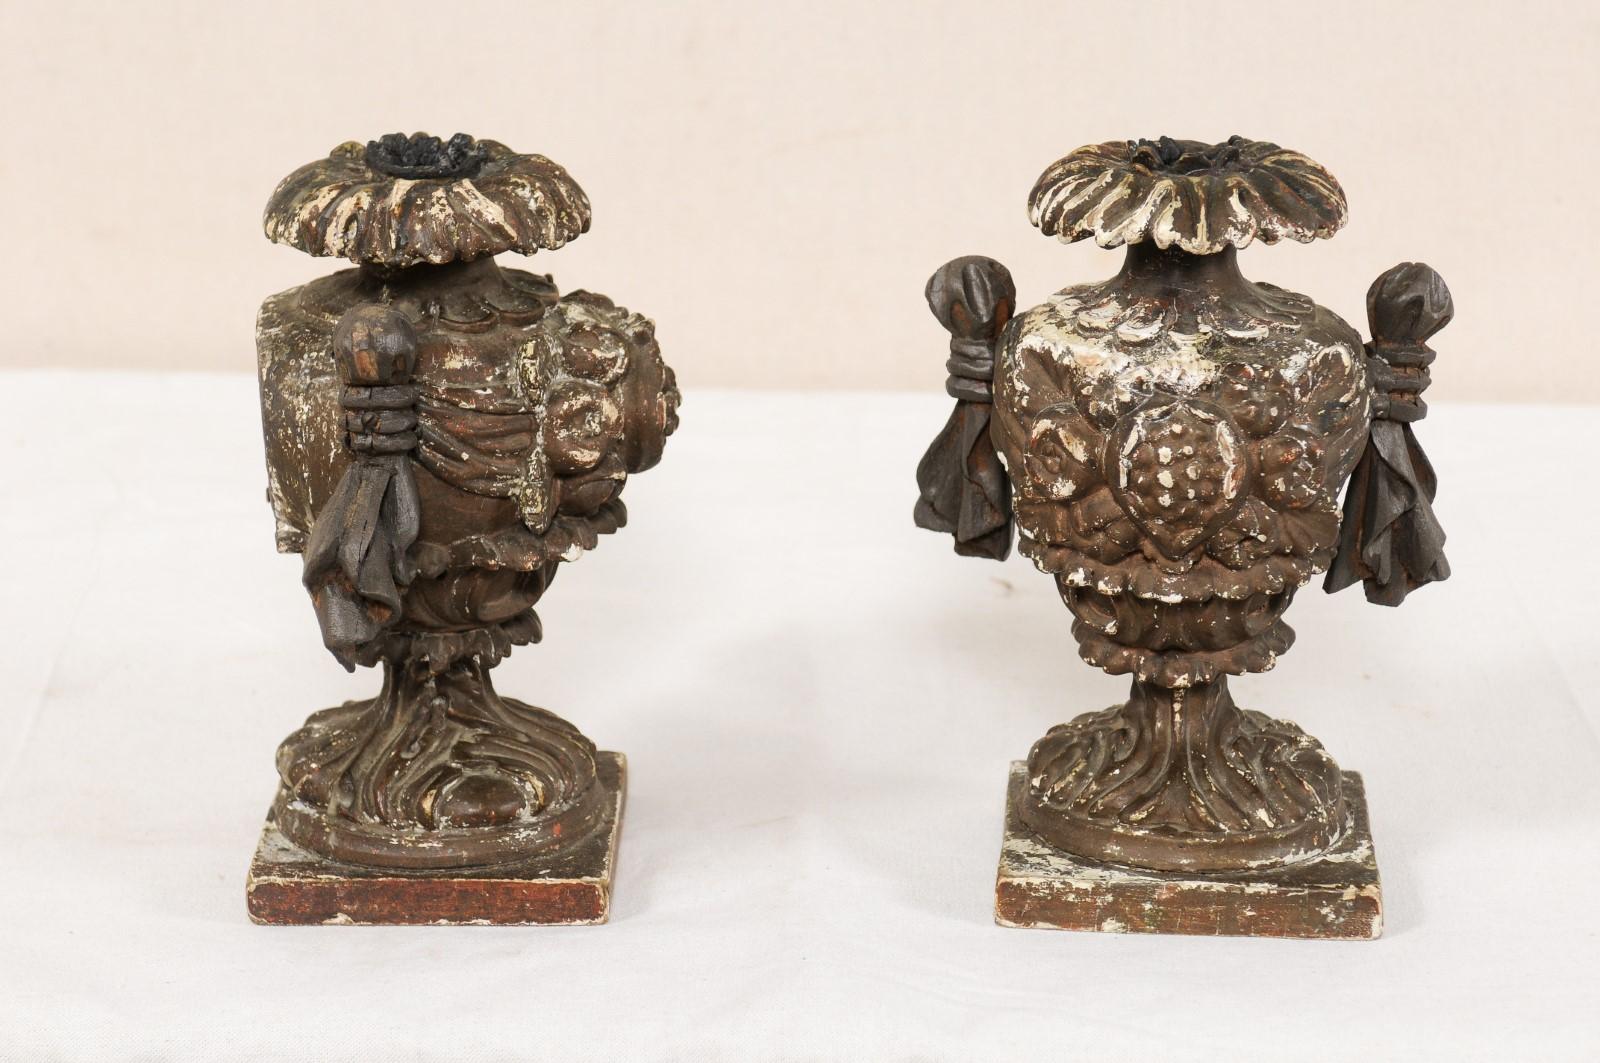 An Italian pair of smaller sized carved-wood candleholders from the early 19th century. These antique candleholders from Italy feature hand carved urn-shaped fragments with floral embellishments, petal leaf upper lips, and handles which give the